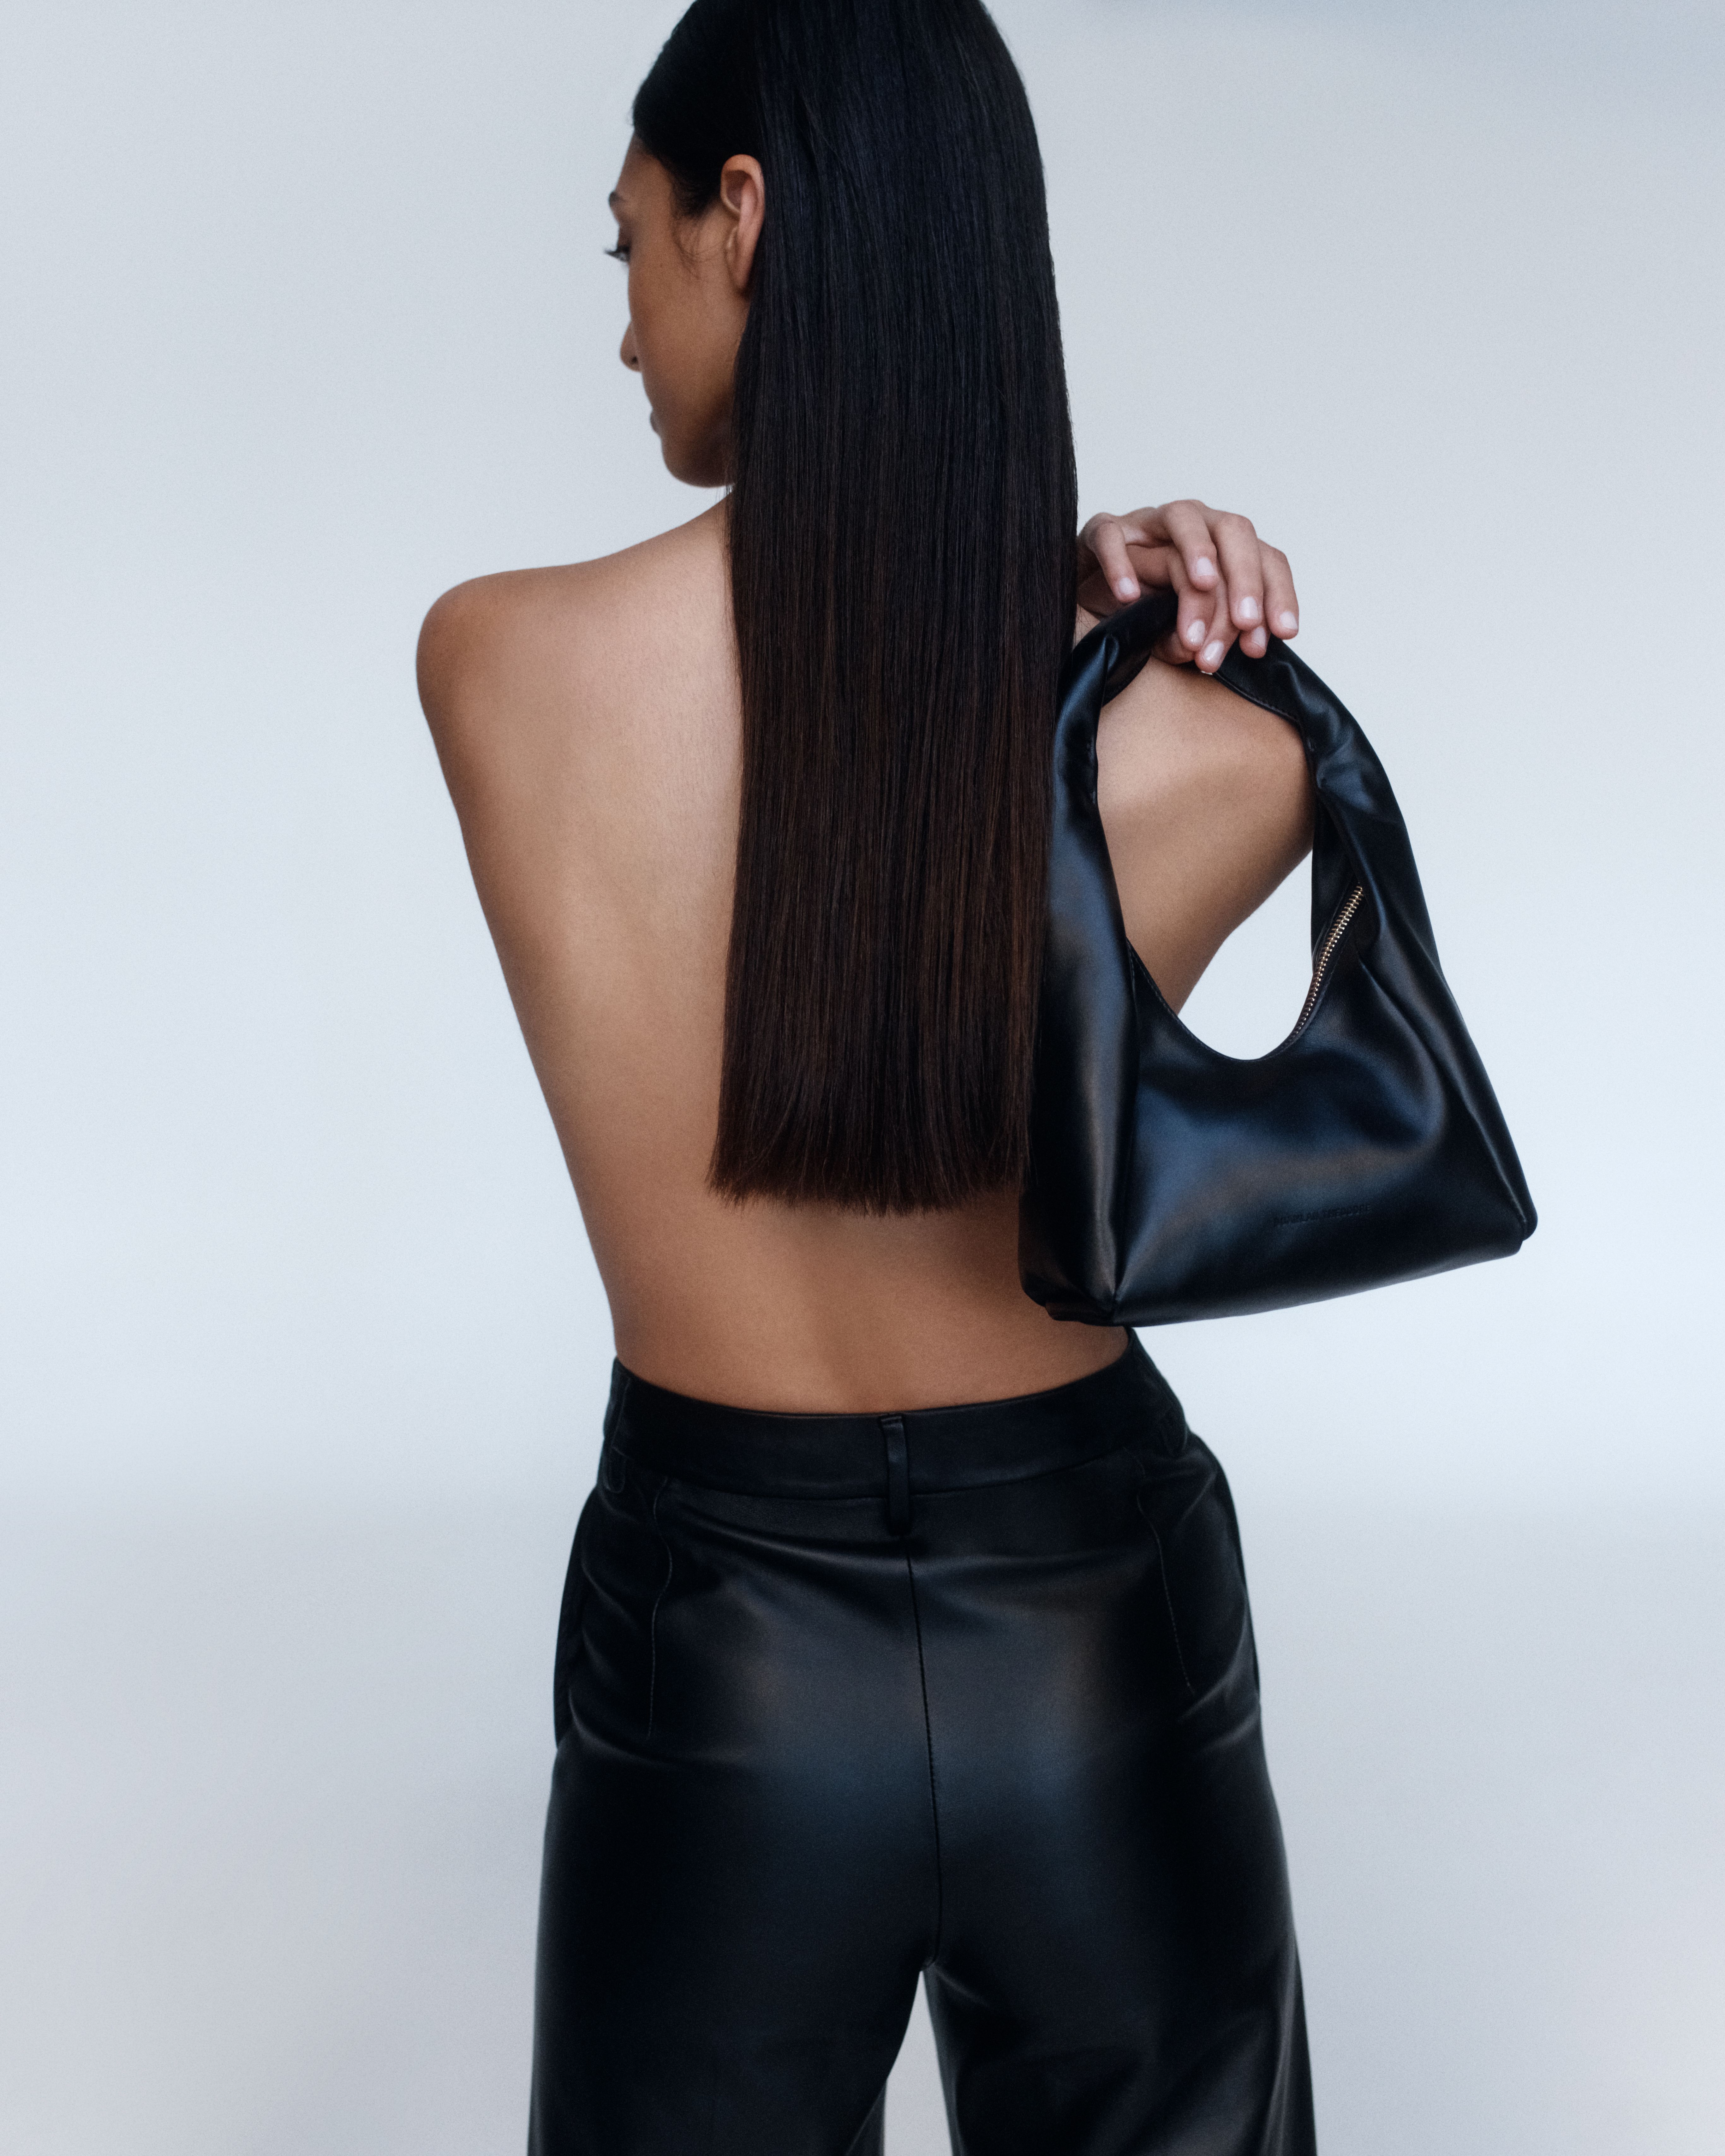 Model facing the wall with long black hair with a small black leather bag draped over her right shoulder